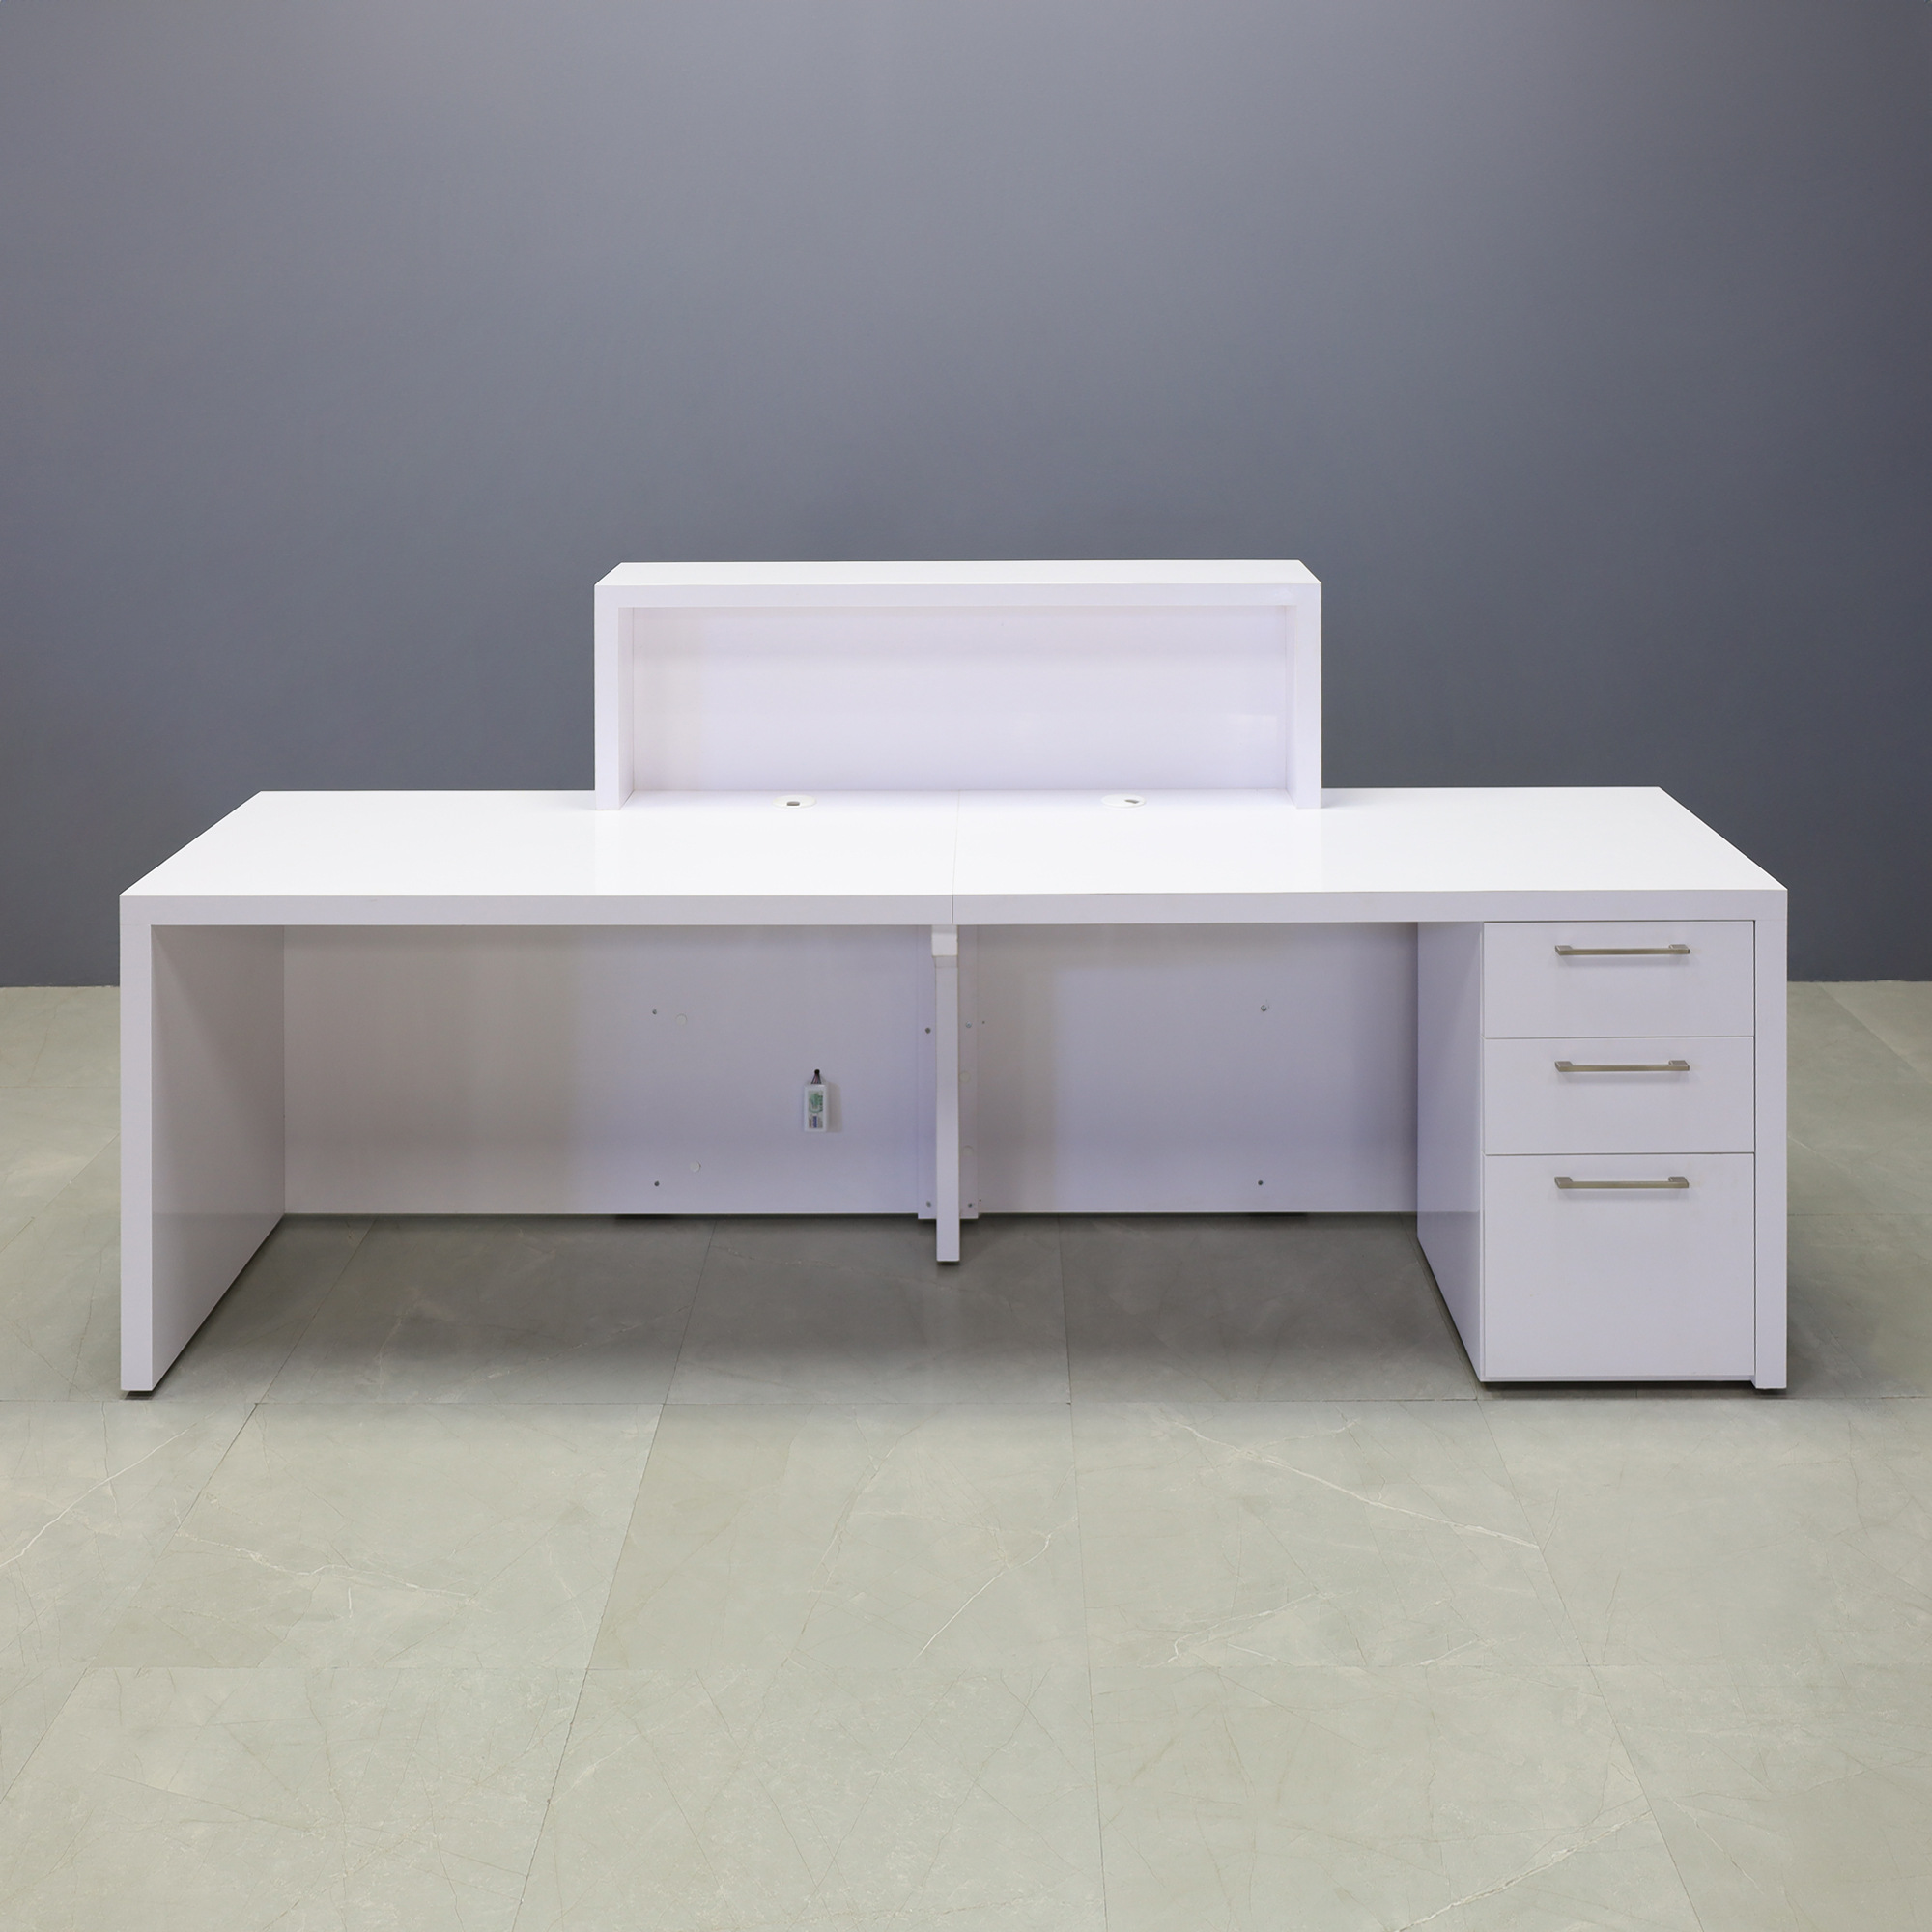 96-inch New York Extra Wide Reception Desk in white gloss laminate main desk and uptown walnut recess accent, with color LED. Built-in storage with two pull-out drawers and one file drawer on right side when sitting, shown here.